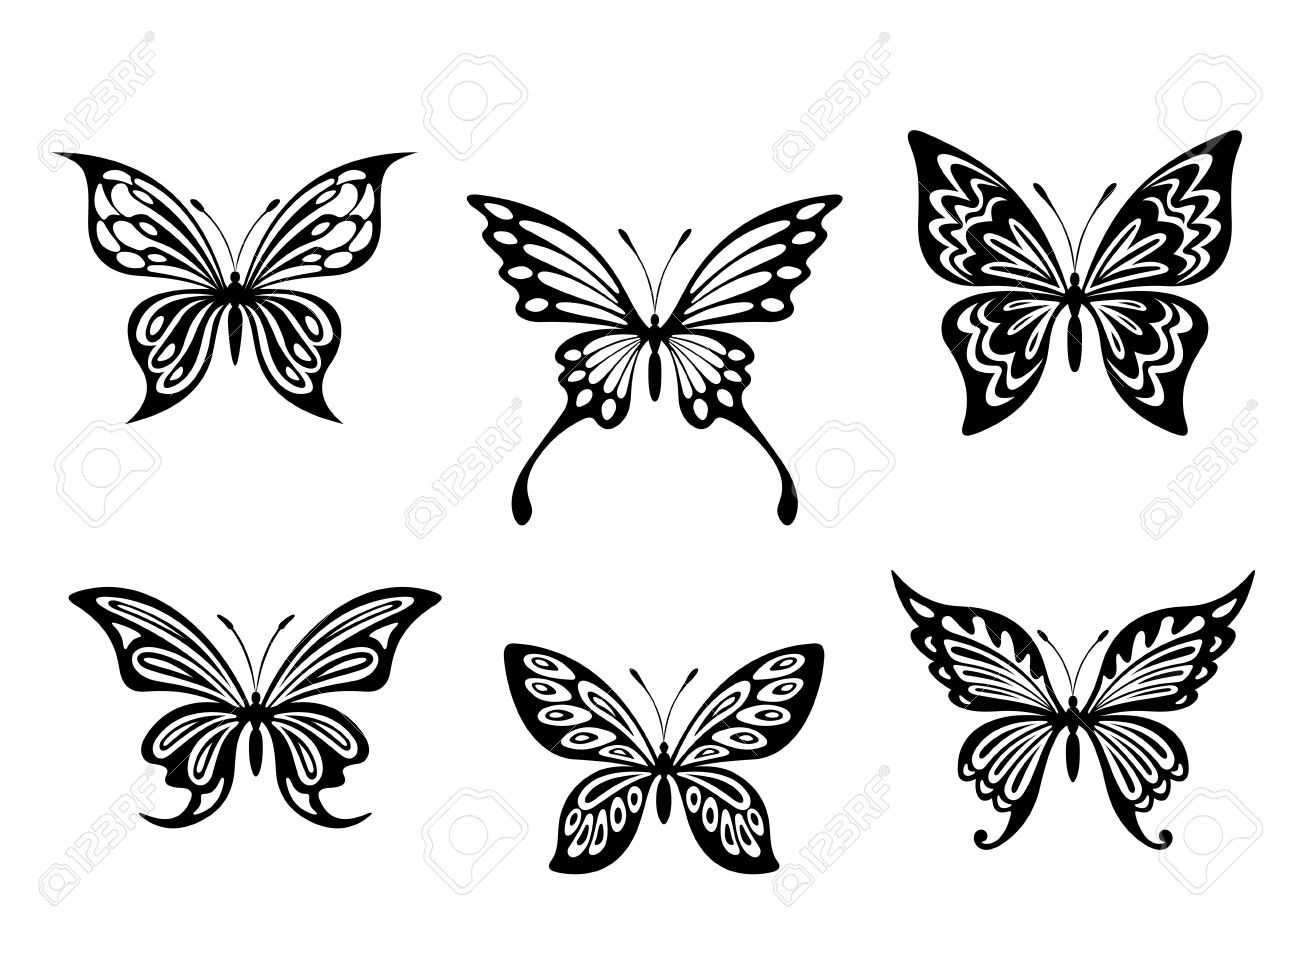 Black Butterfly Tattoos And Silhouettes Isolated On White Background for dimensions 1300 X 969